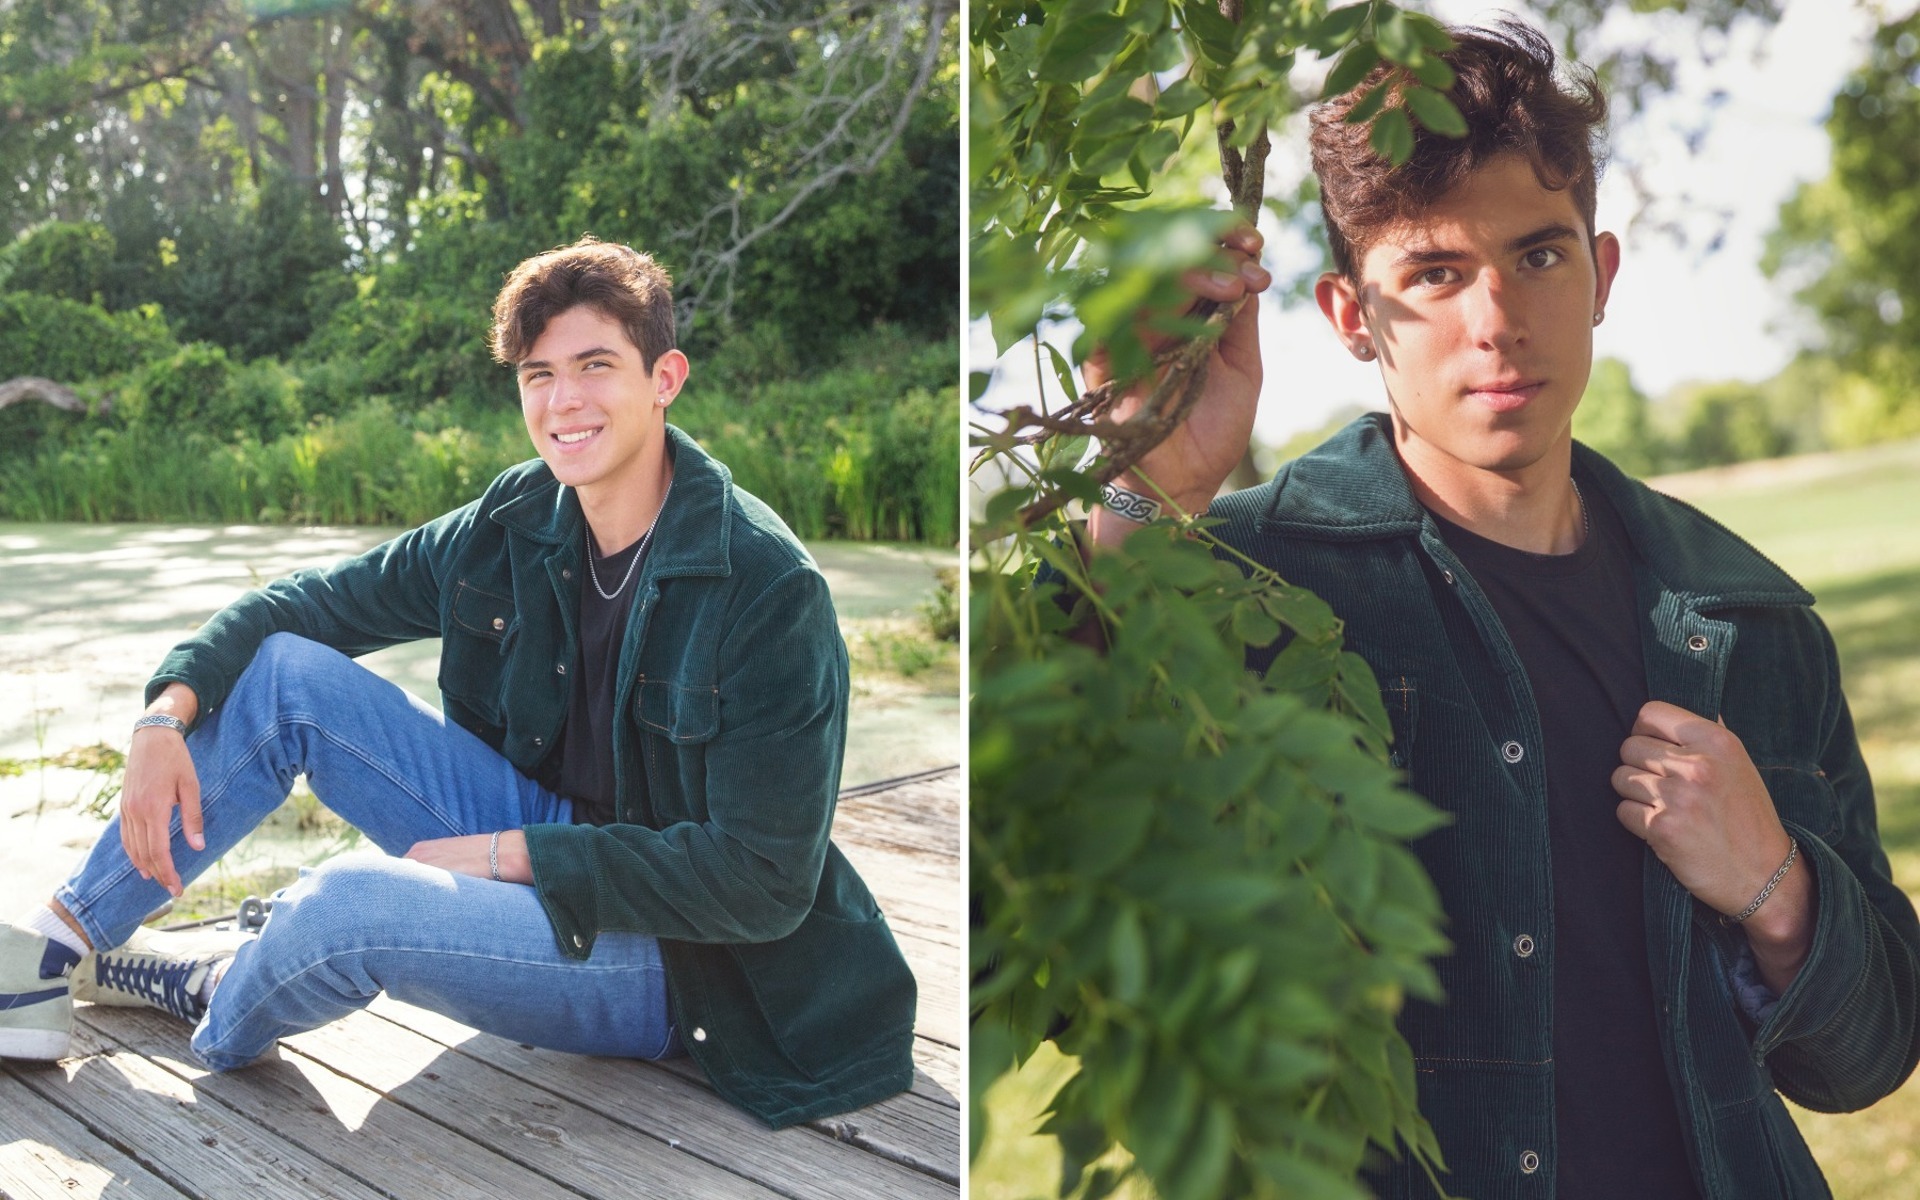 hs senior boy in a green corduroy shirt  poses with green foliage